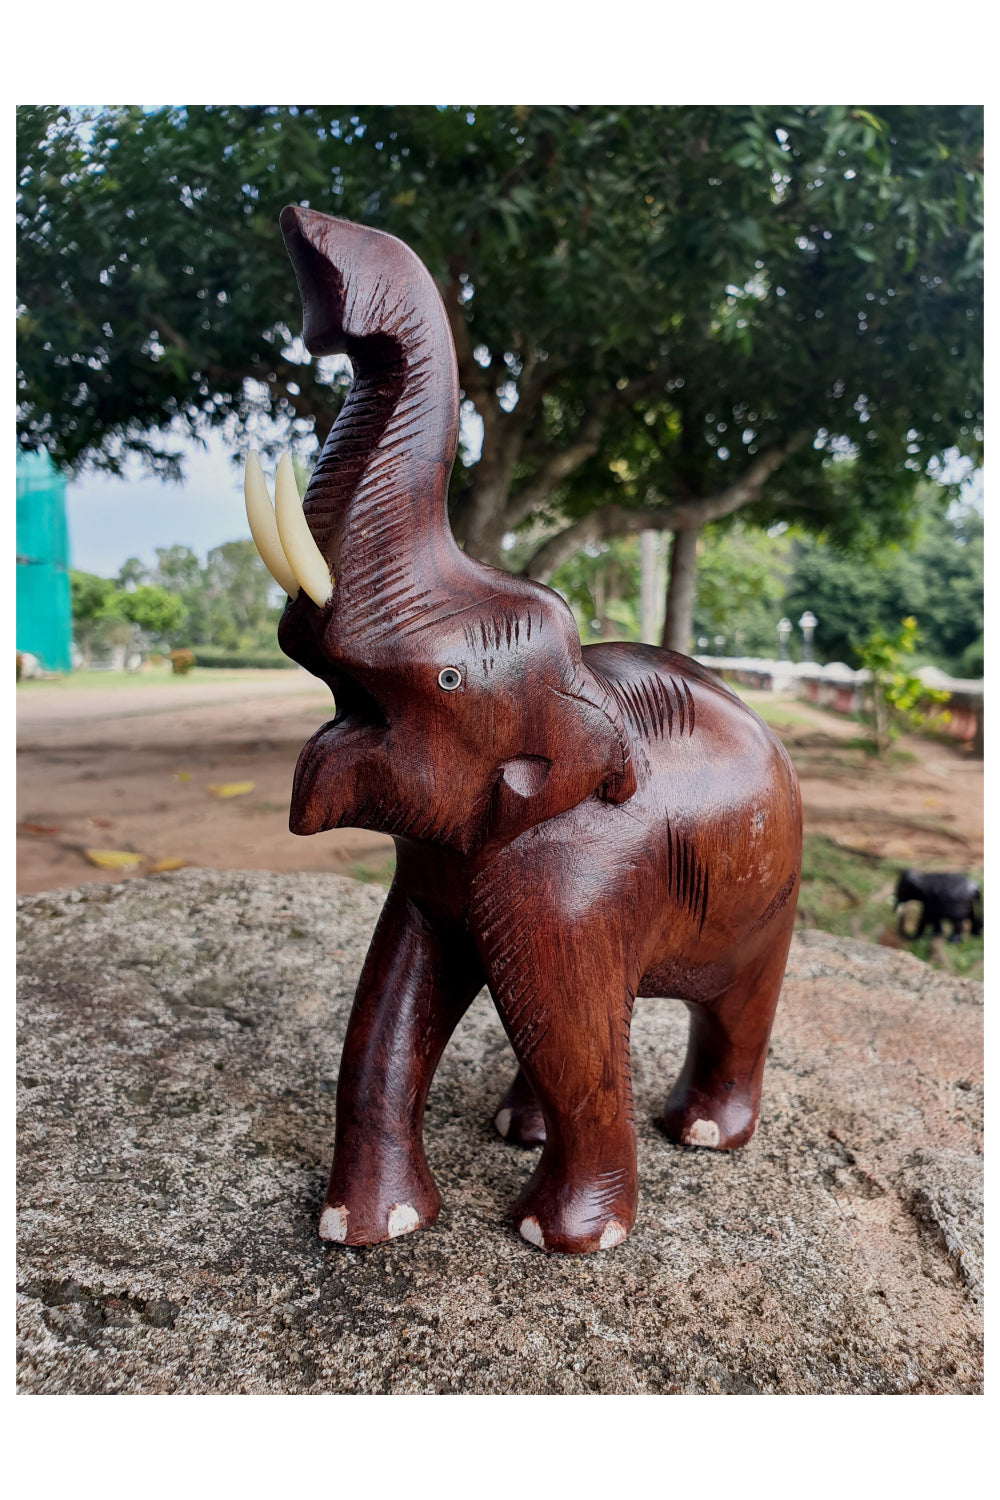 Southloom Handmade Trumpeting Elephant Handicraft (Carved from Rose Wood) 8 Inches